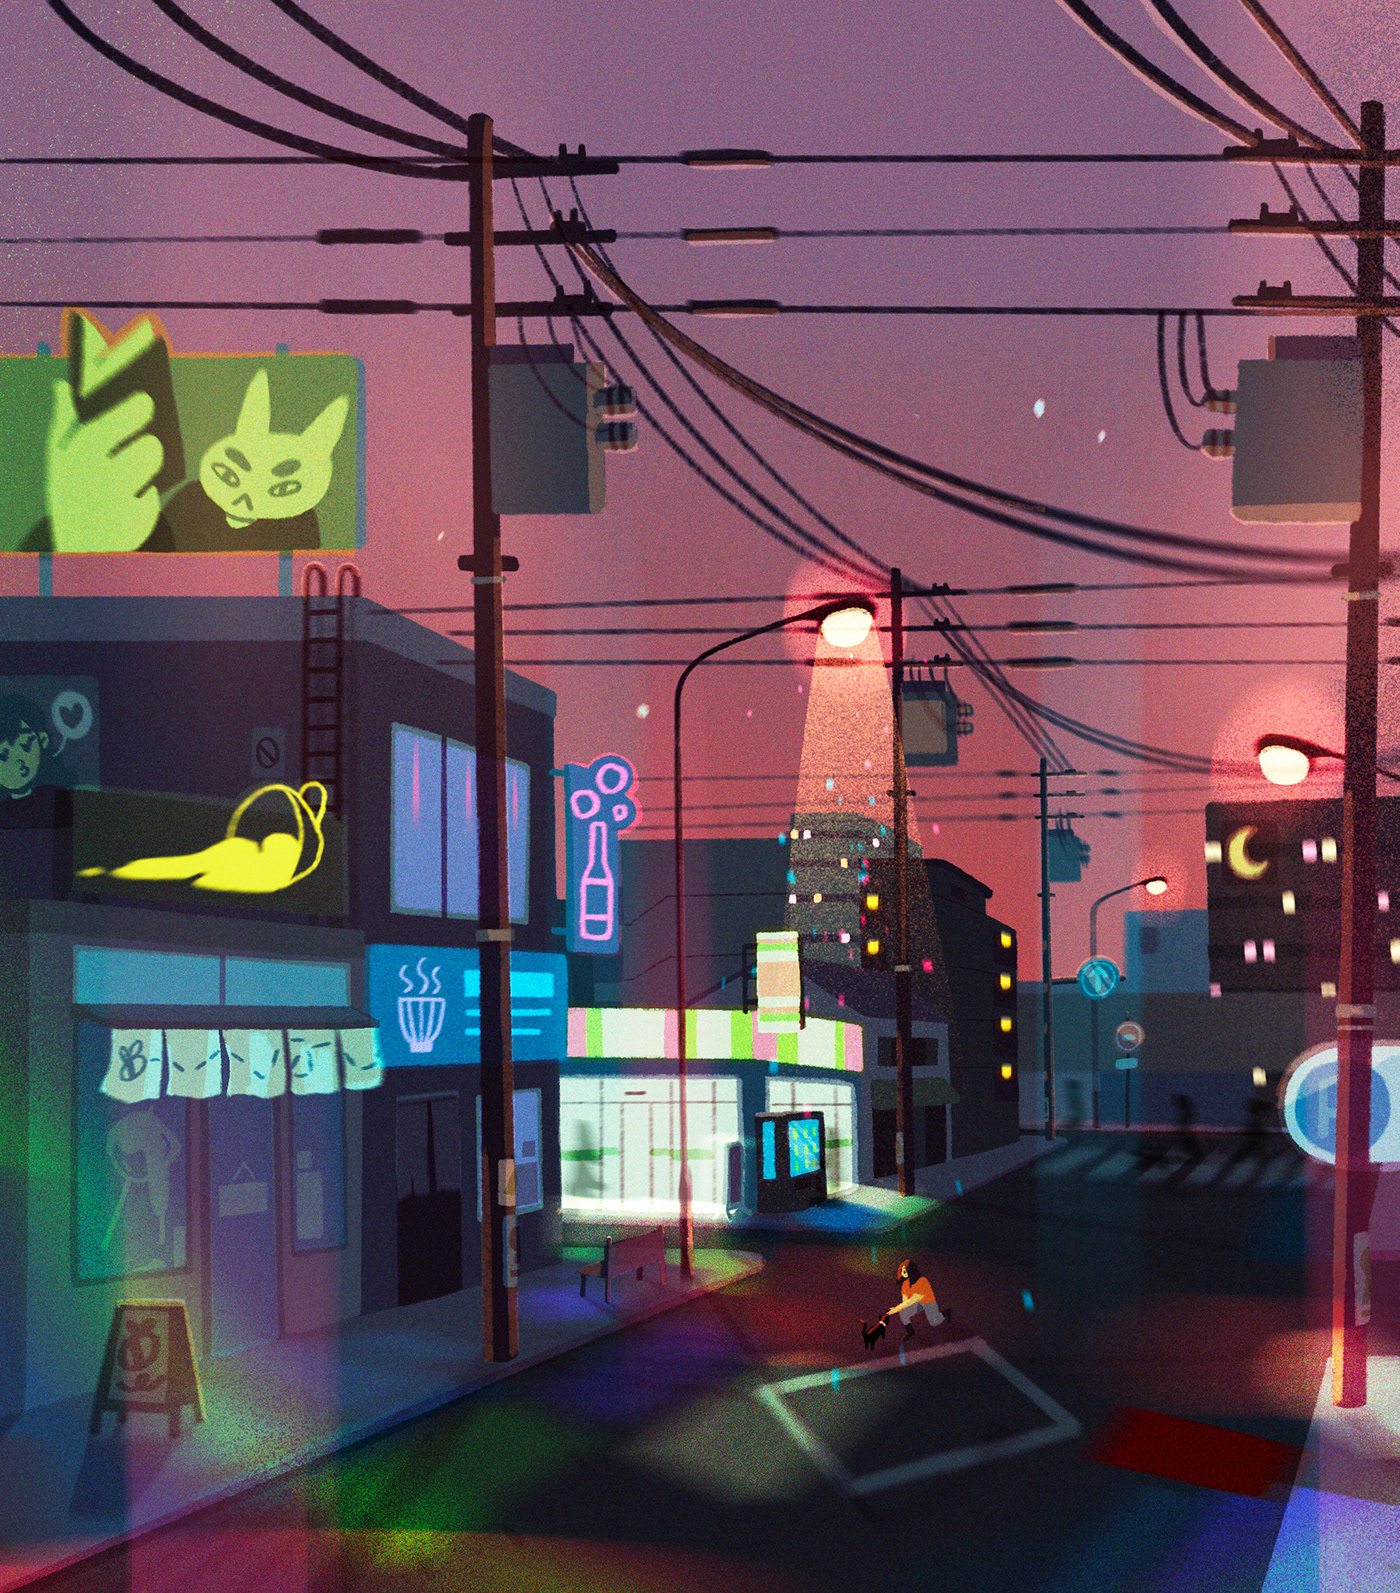 anime city concept art daily Digital Art  everyday ILLUSTRATION  personal quarrantine thoughts